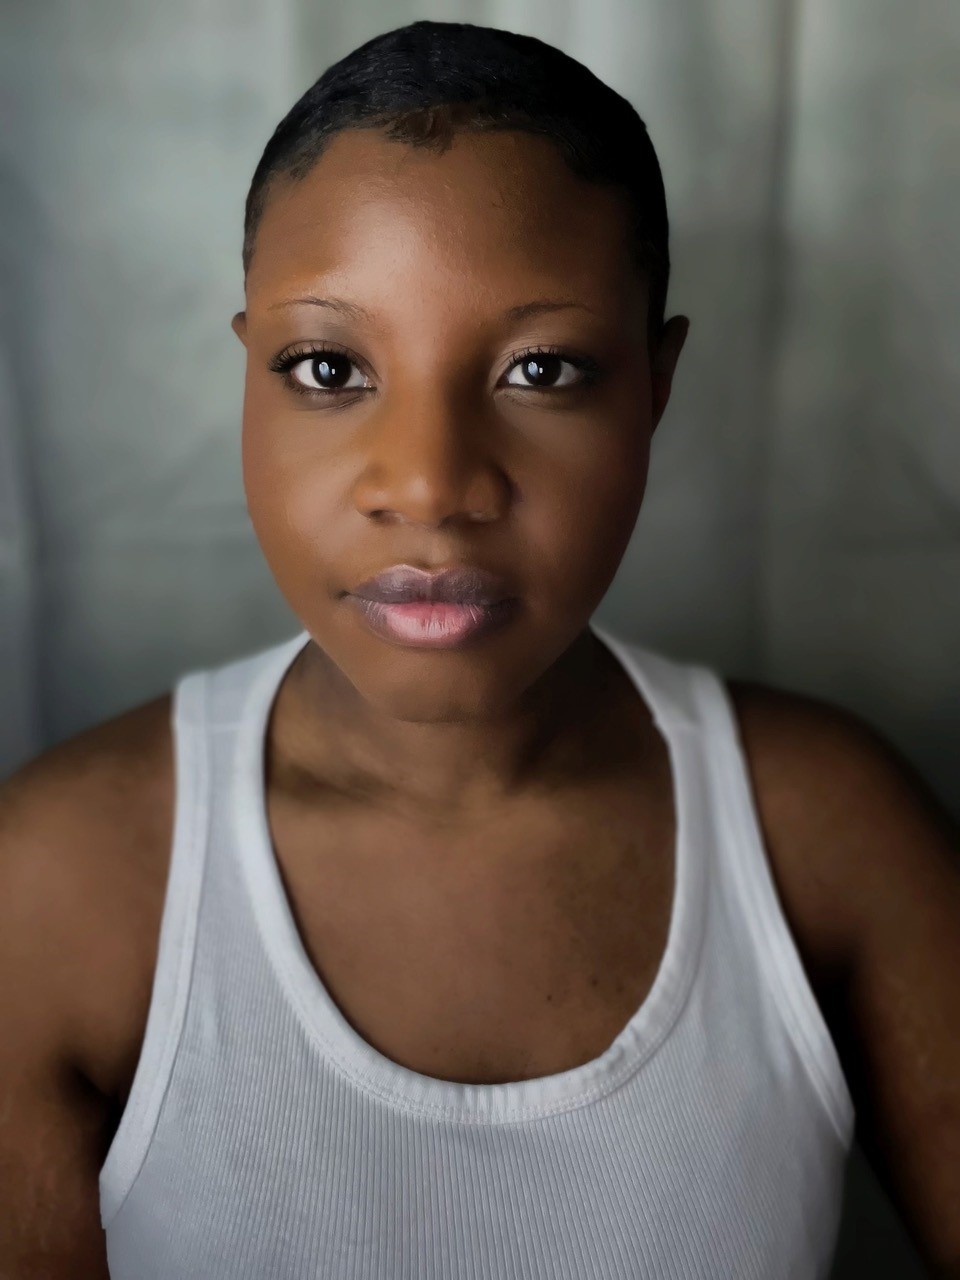 A headshot of actor Mara Allen, who looks directly at us. Mara has brown skin and wears a white tank top. 